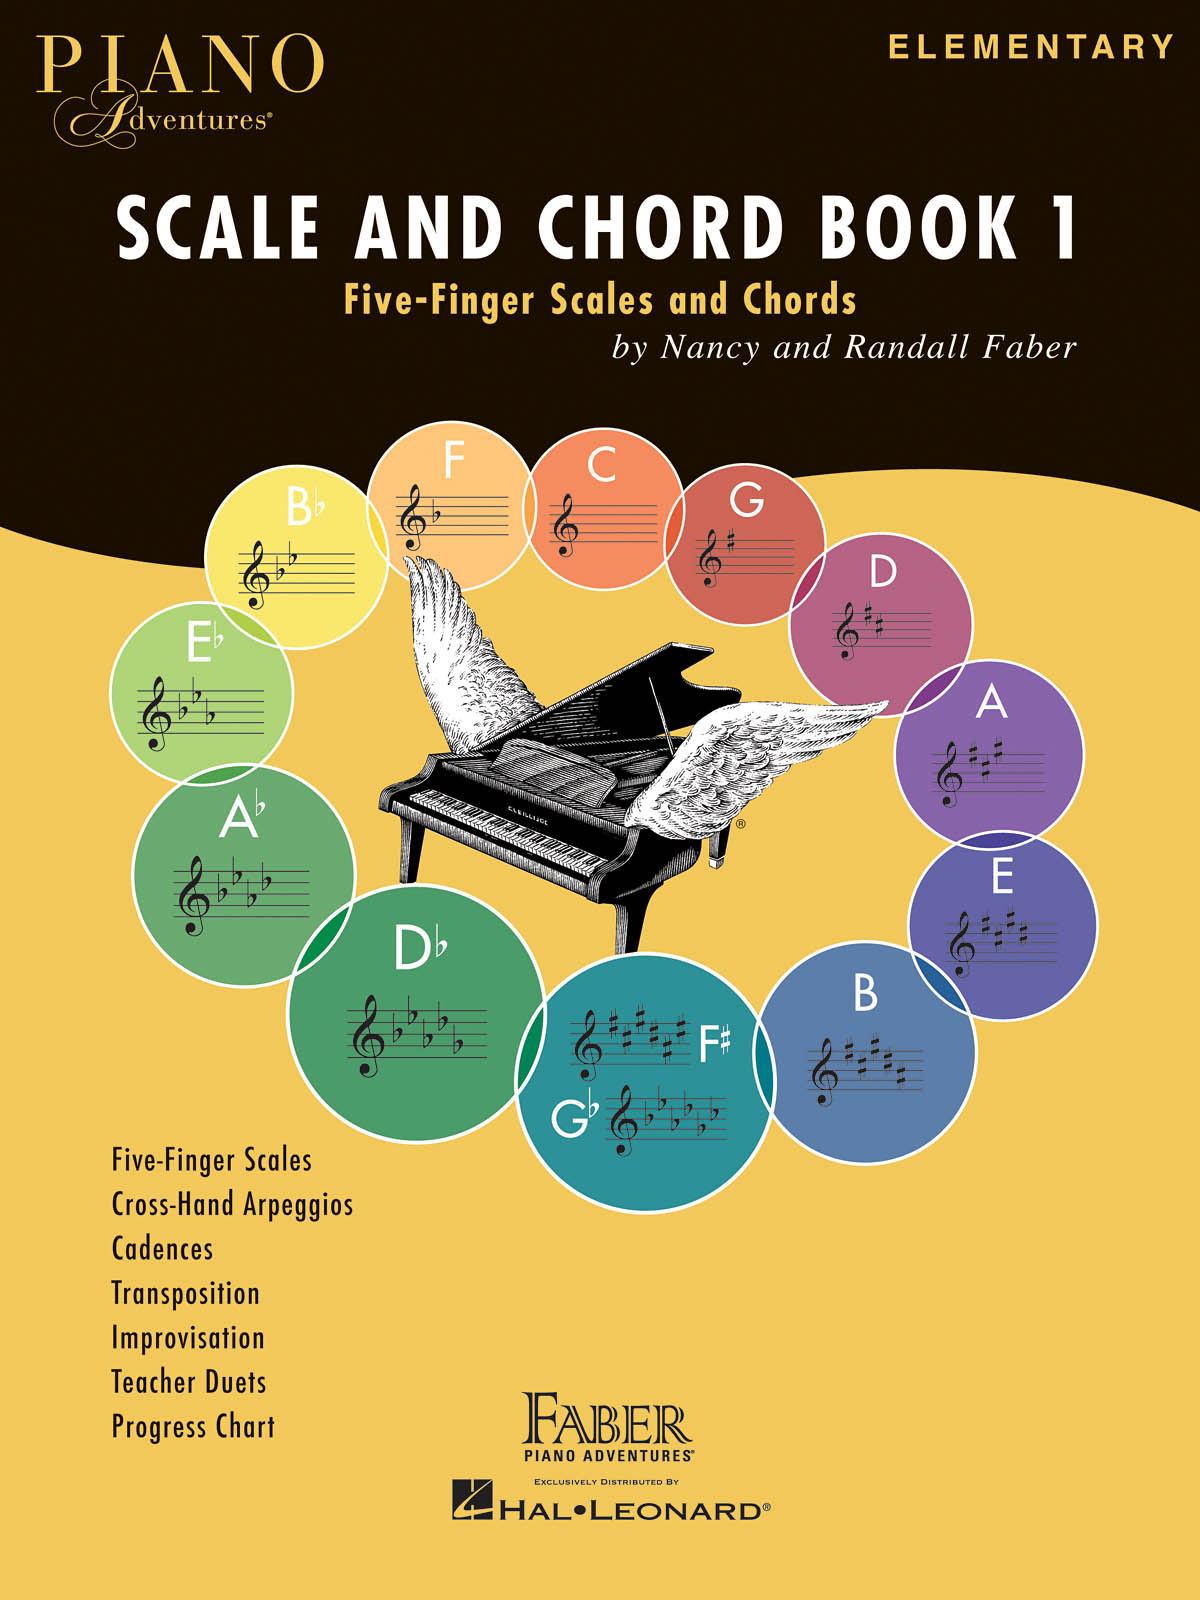 Piano Adventures Scale and Chord Book 1 - Five-Finger Scales And Chords